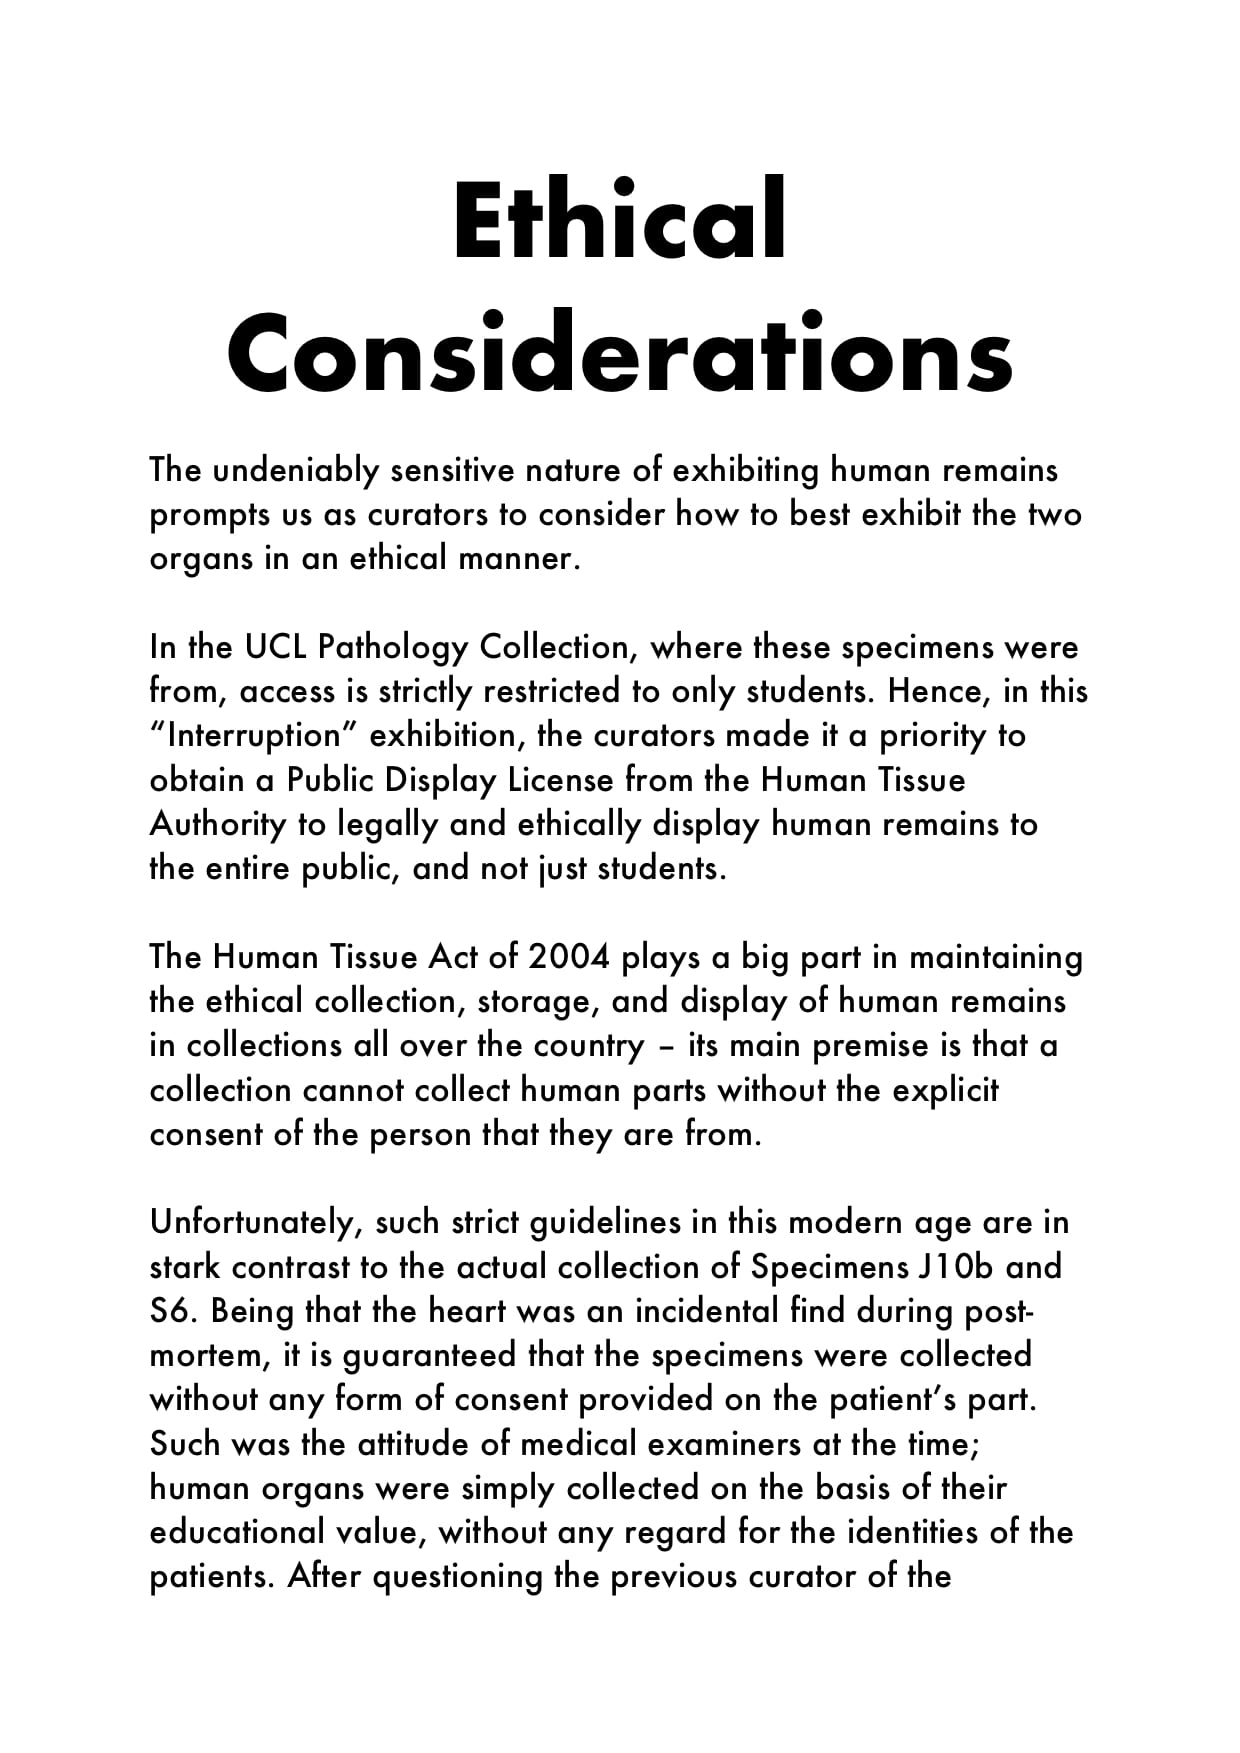 ethical considerations in qualitative research sample